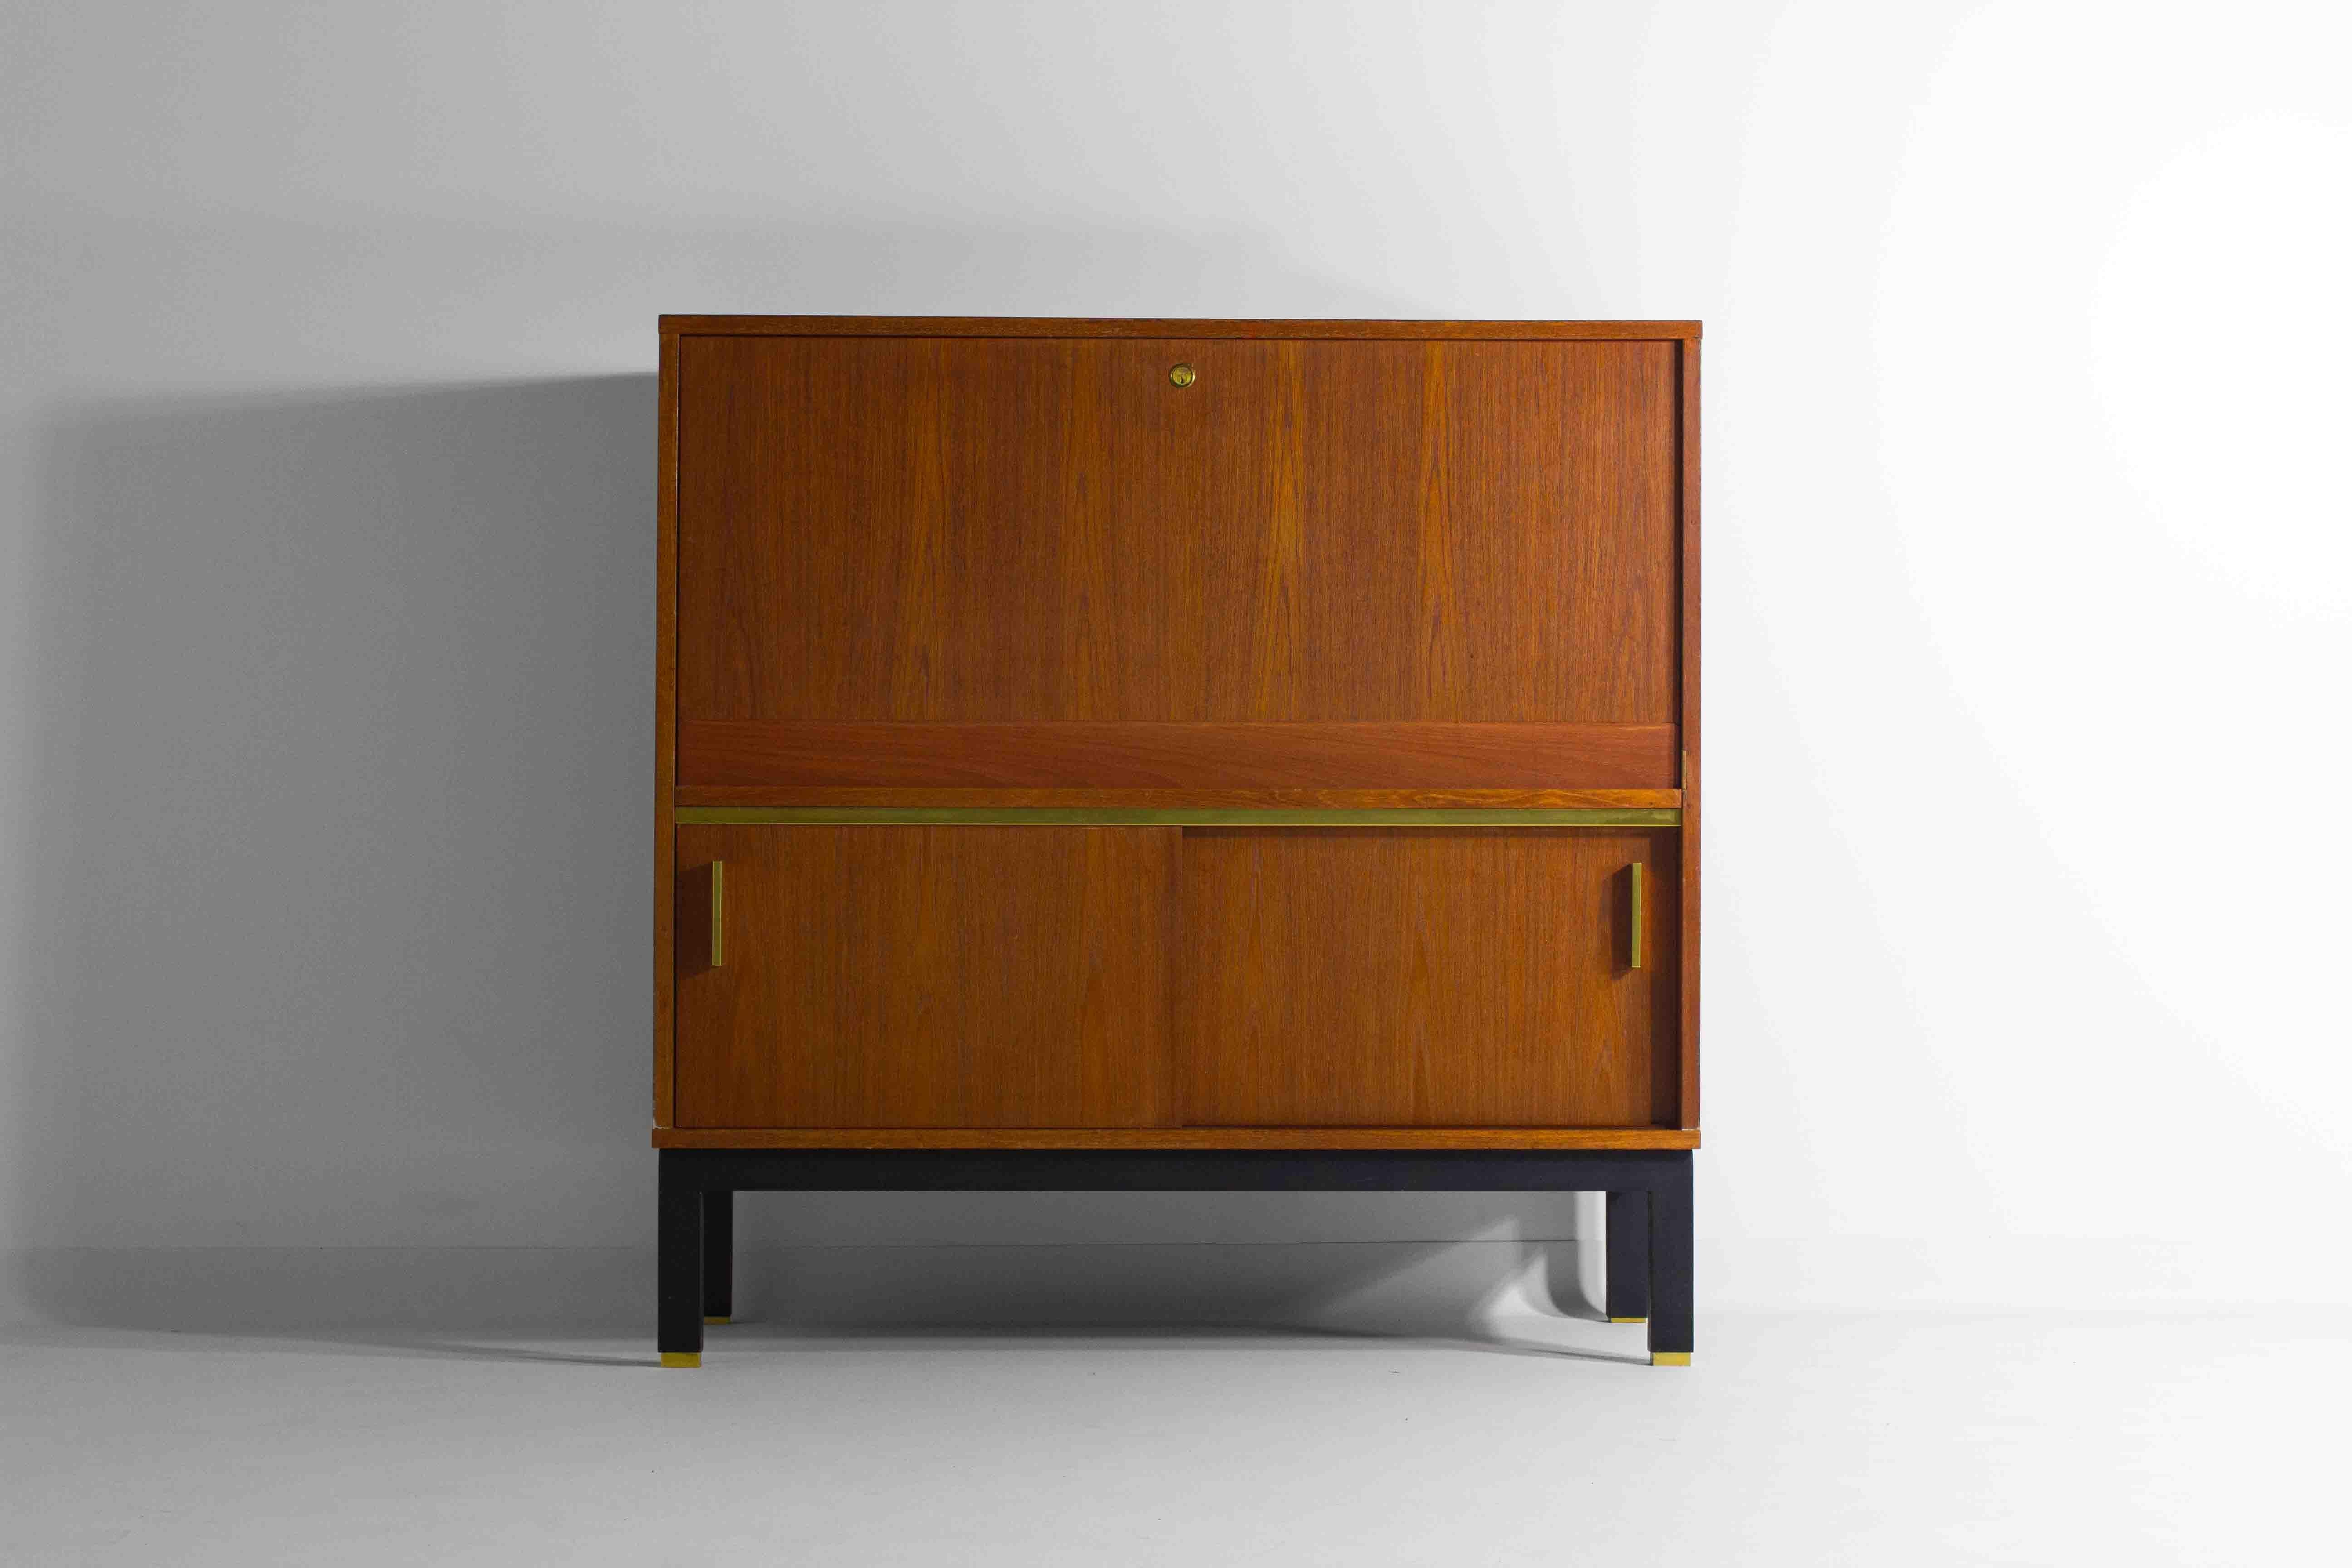 Mid-century modern bar cabinet in premium teak wood adorned with stunning golden details. We have a matching sideboard available from the same set.